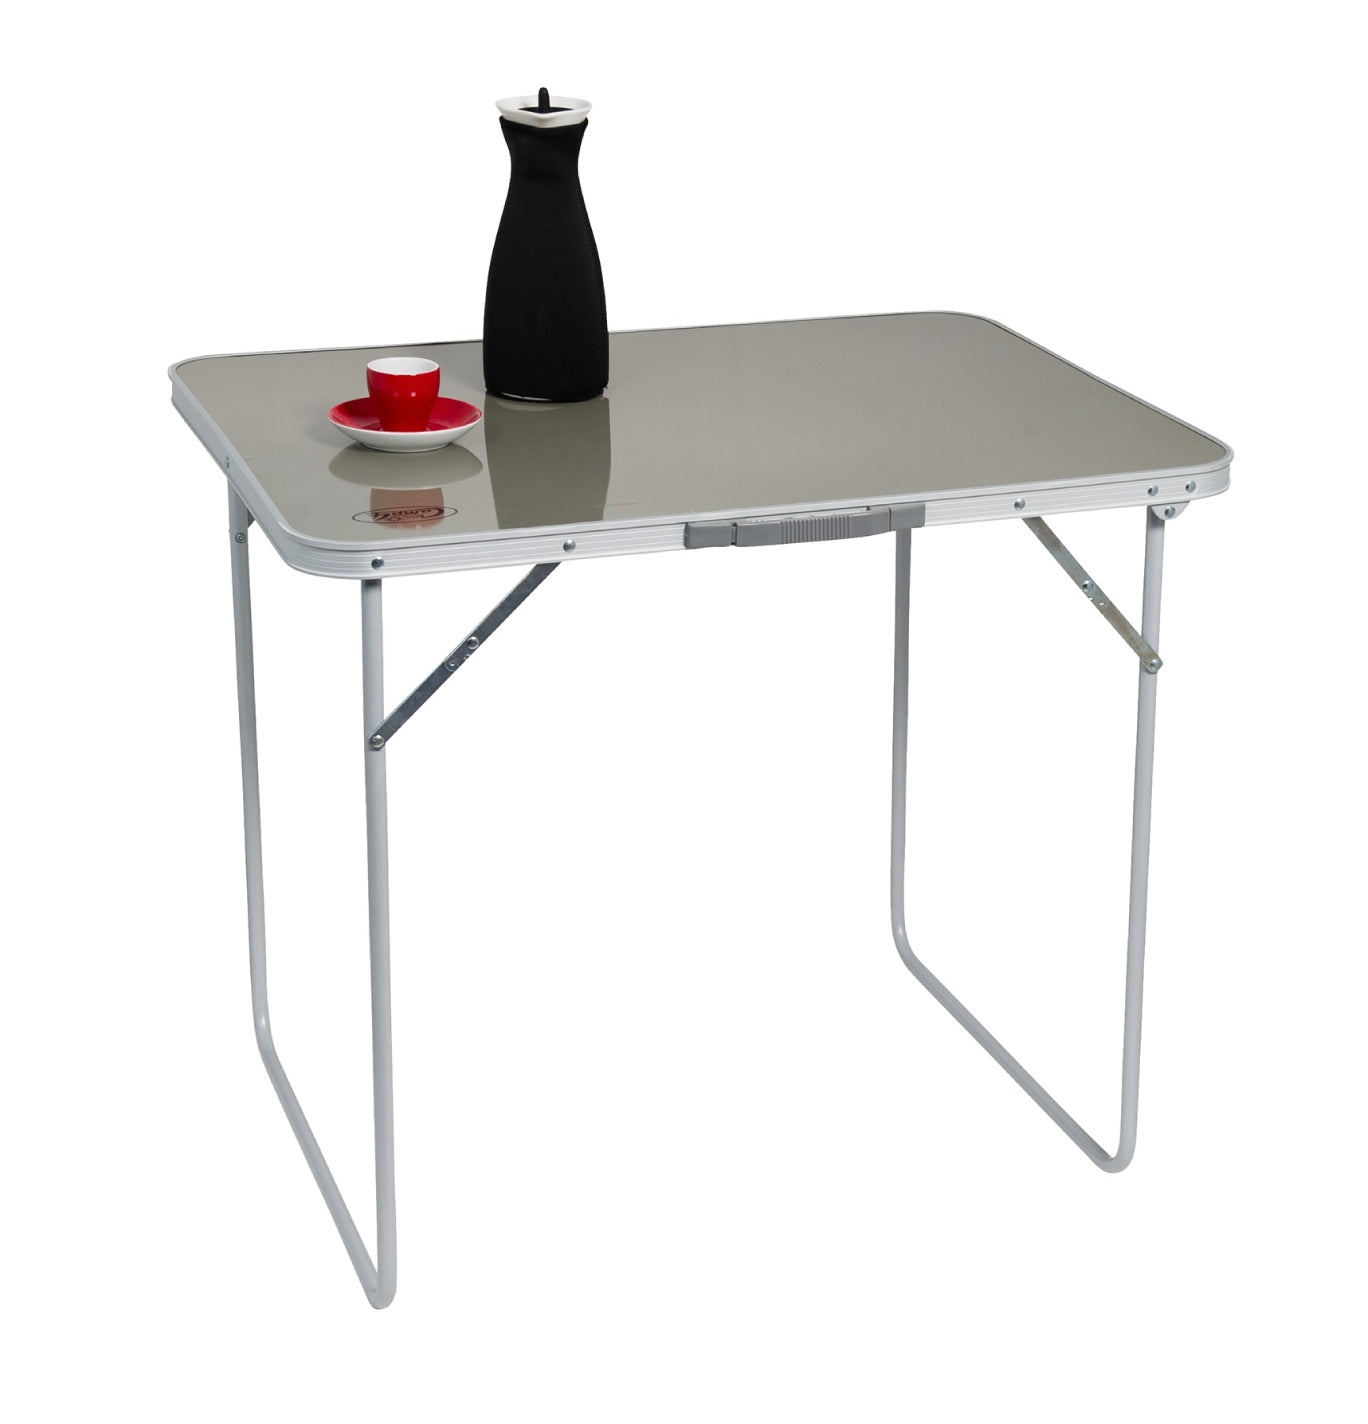 Reimo McCamping Jesper Outdoor Camping Table Image